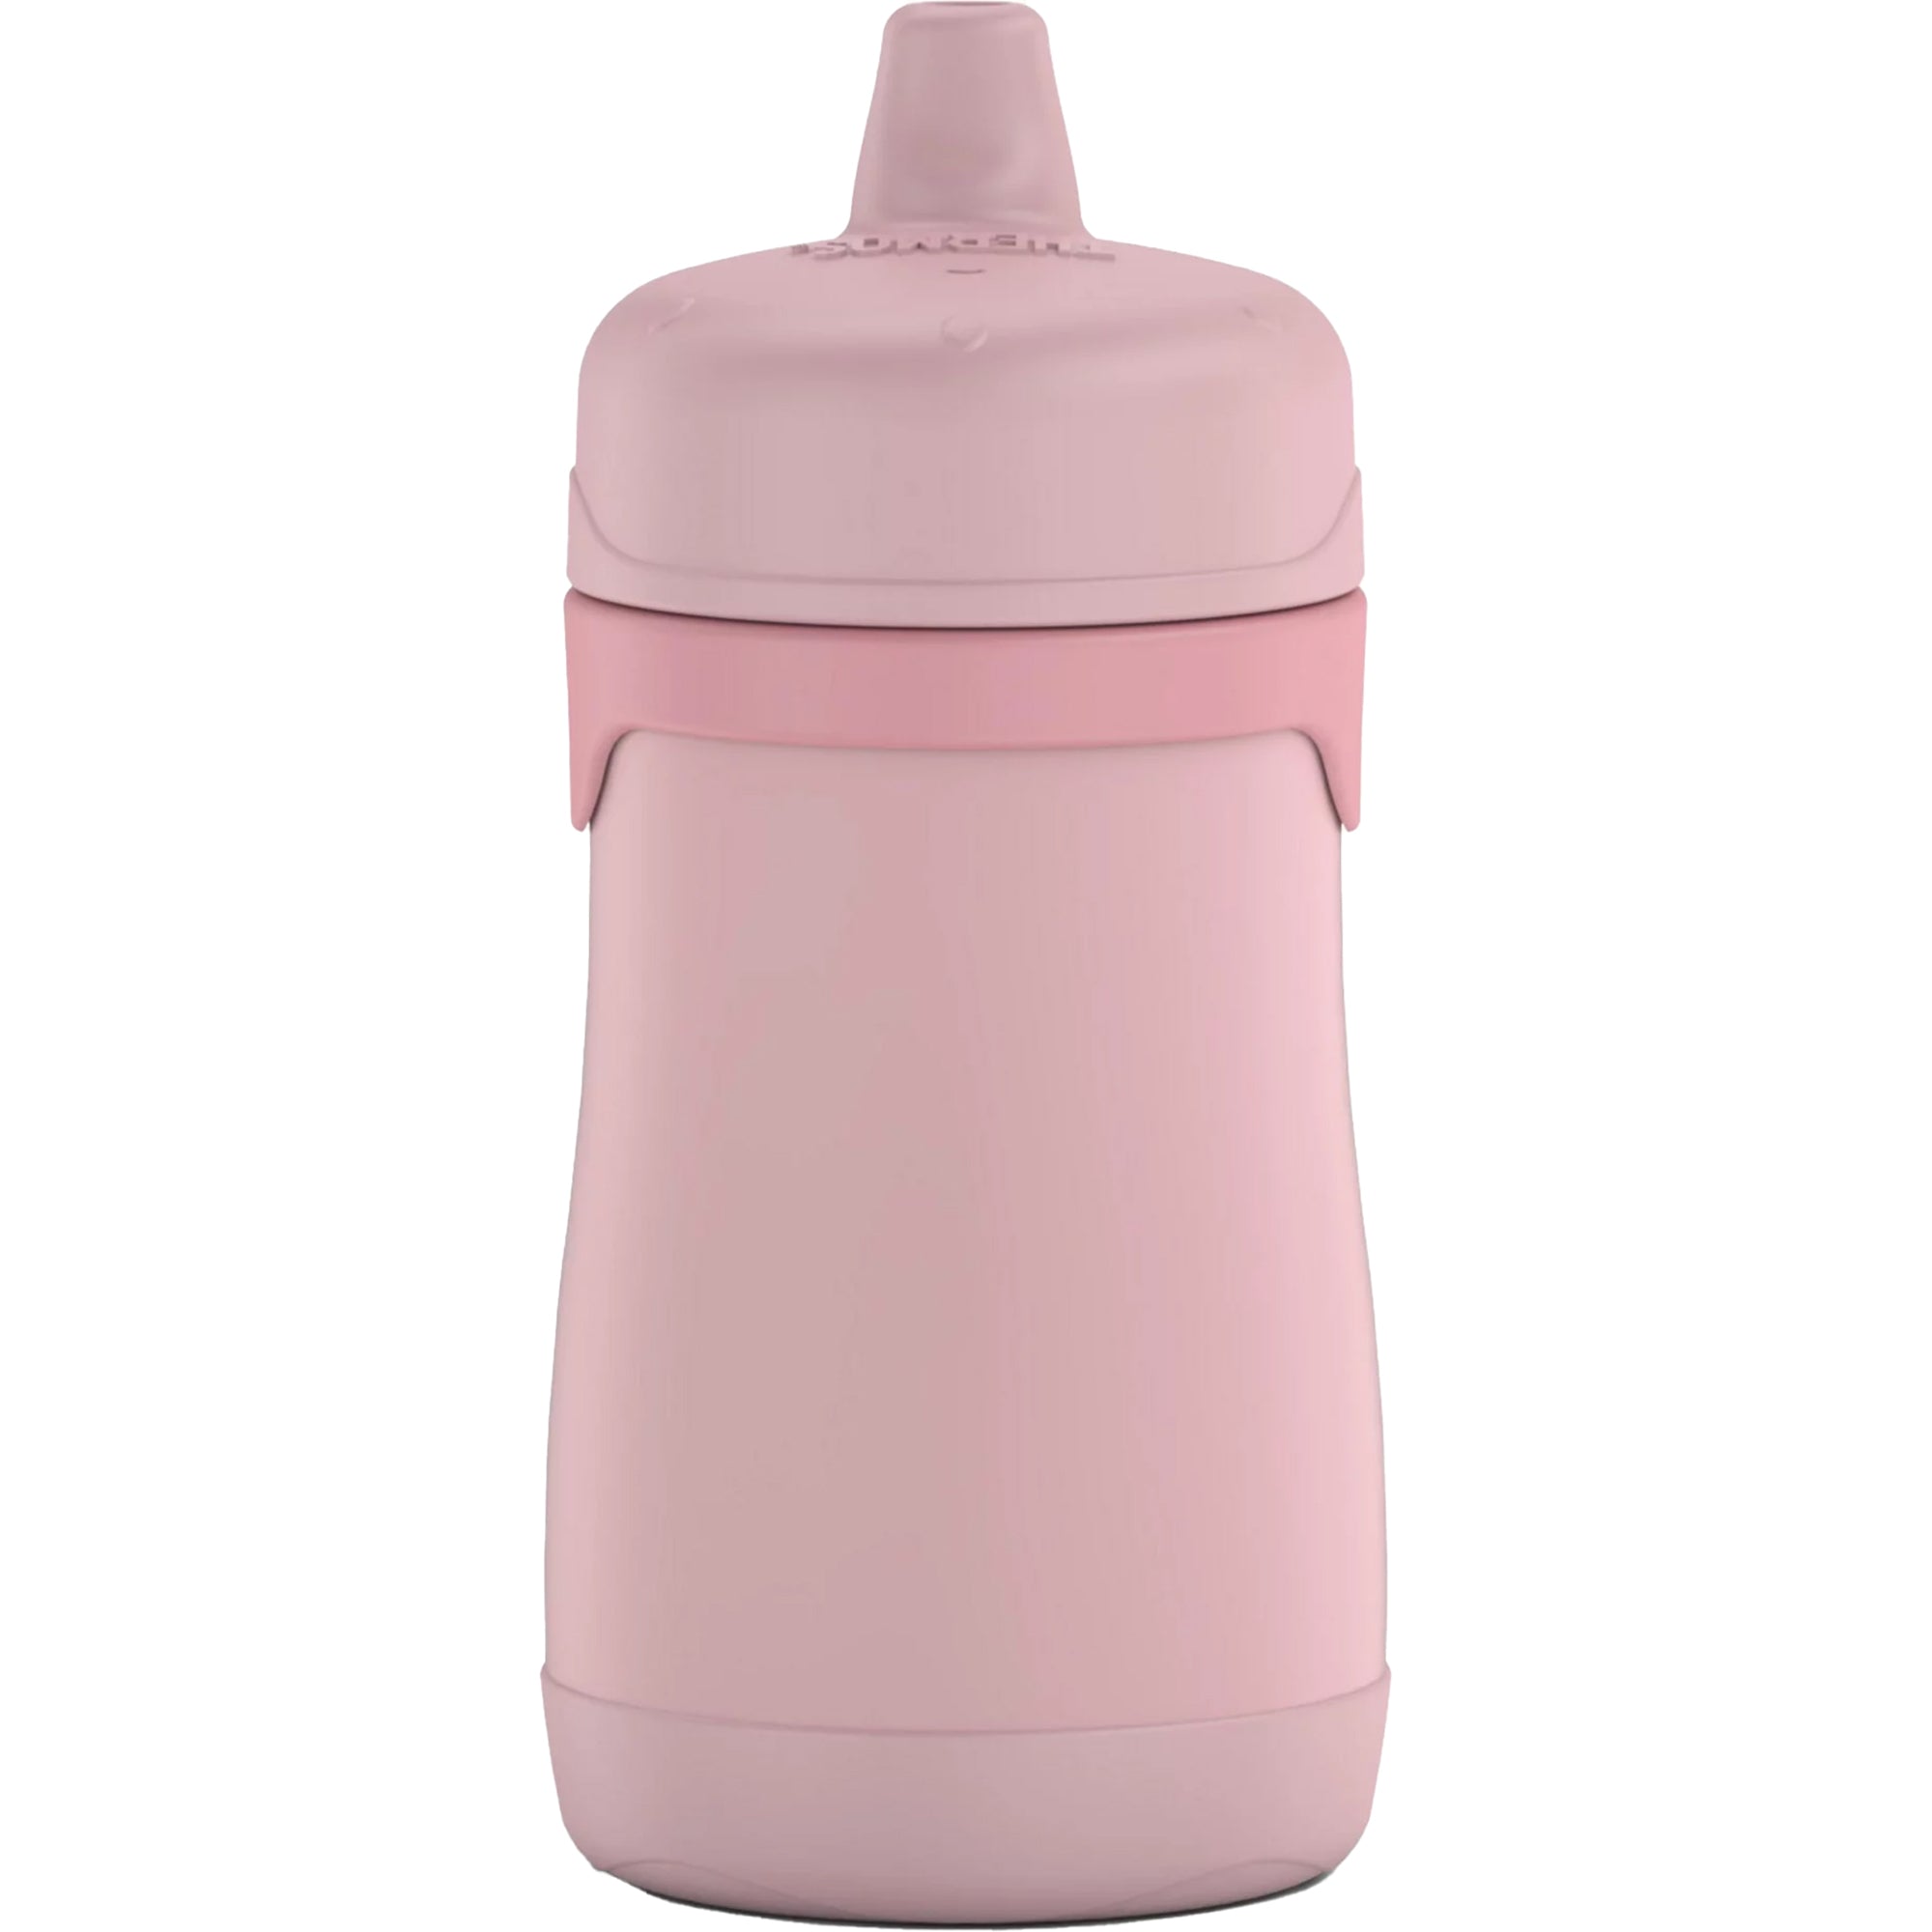 Thermos Baby 10 oz. Simple Pastels Insulated Stainless Steel Sippy Cup - Rose Thermos